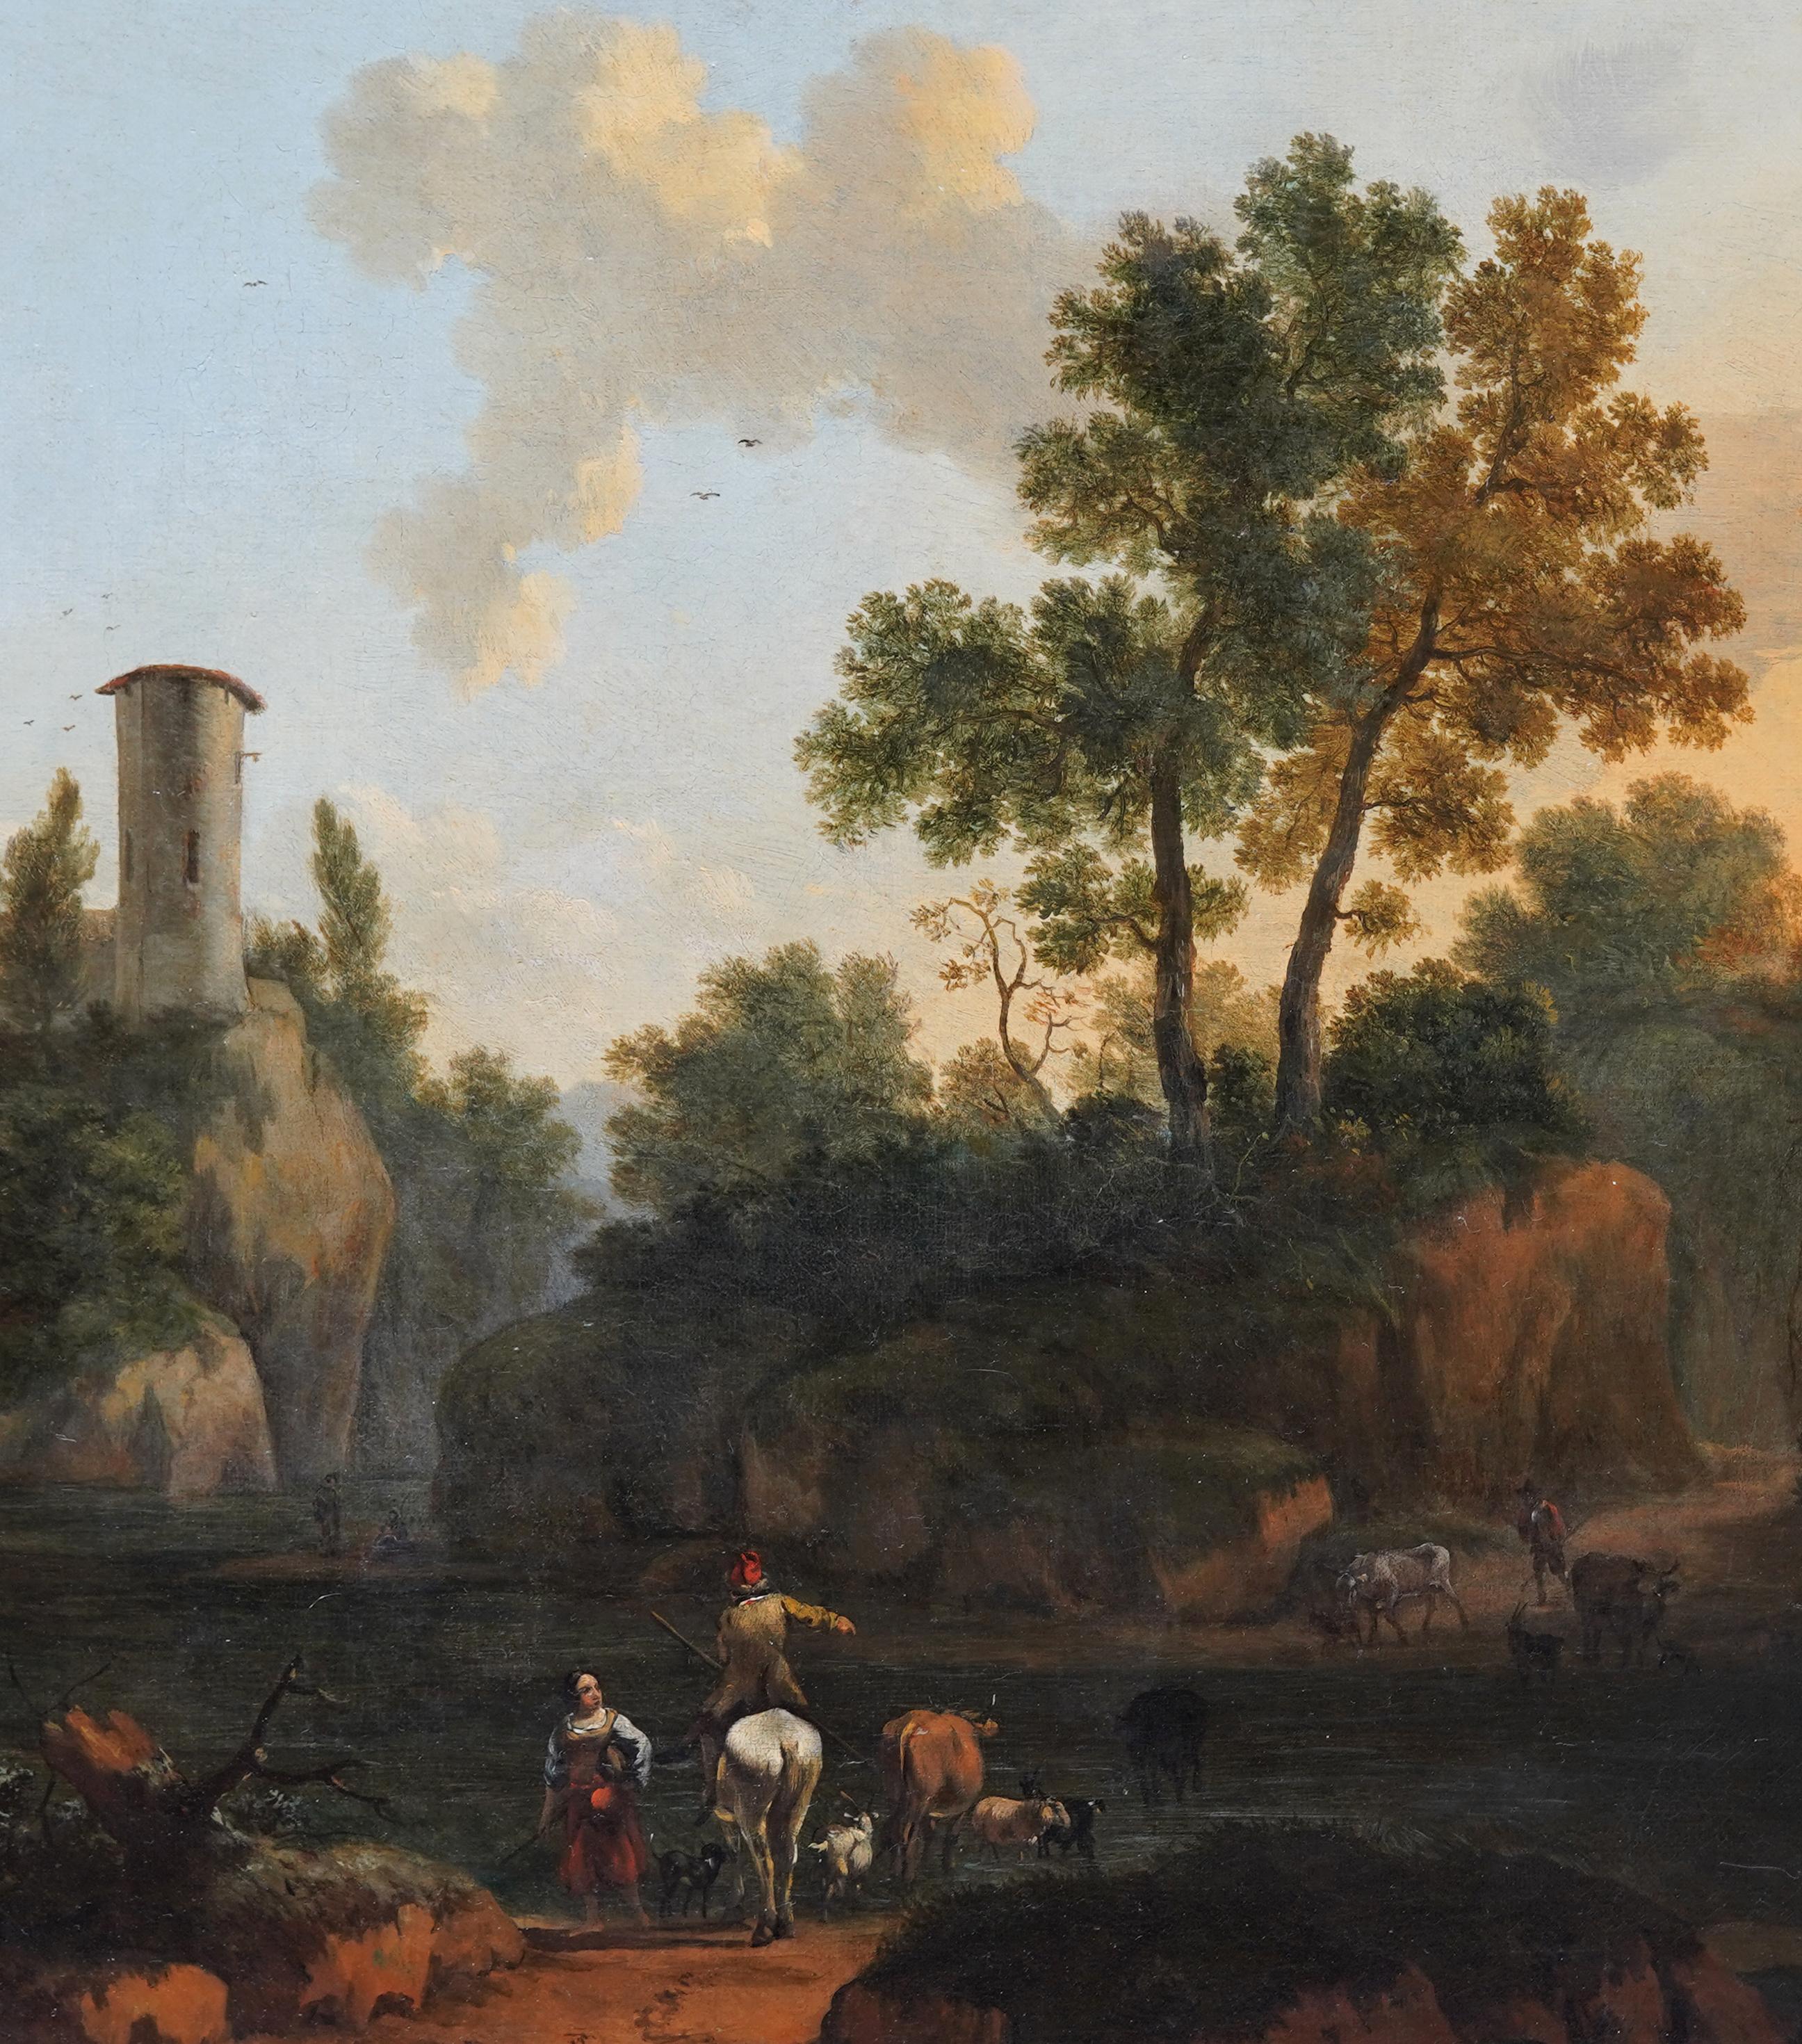 Wooded Figurative River Landscape - Dutch 17thC Golden Age art oil painting  - Old Masters Painting by Abraham Jansz Begeyn